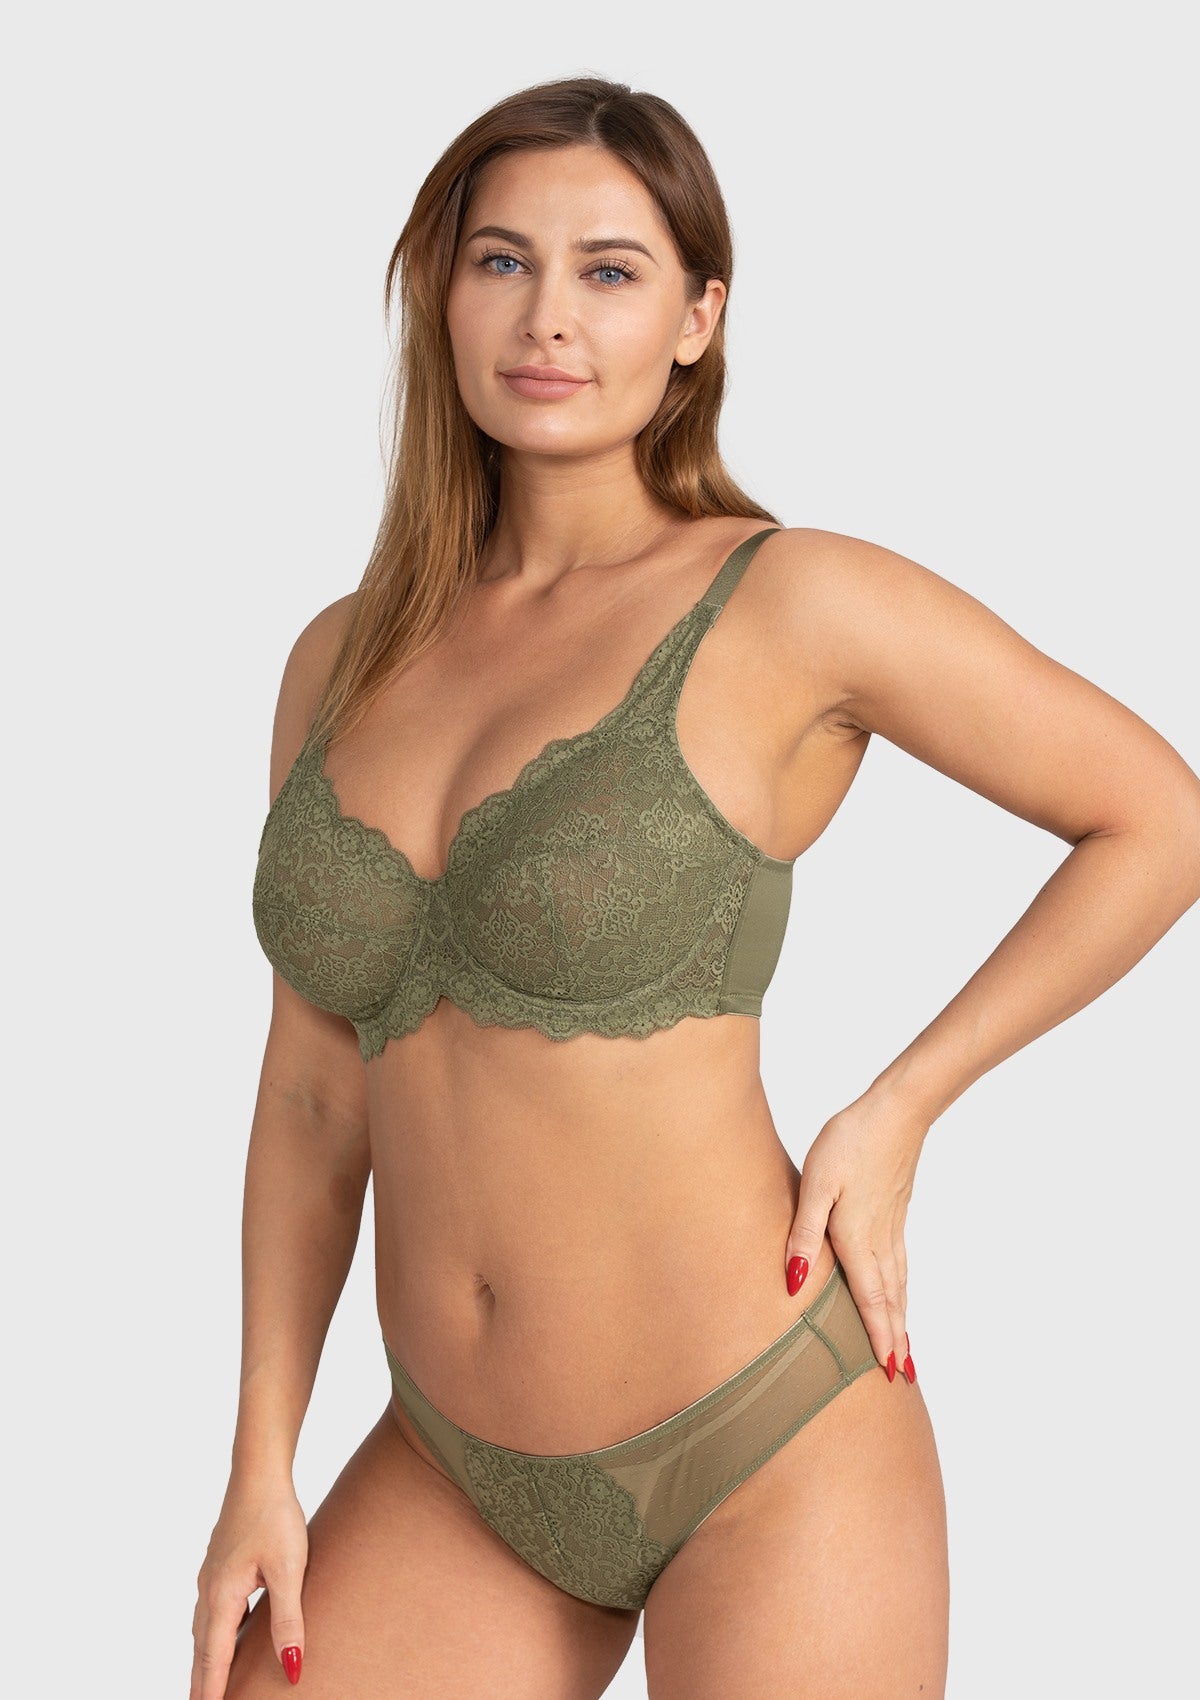 HSIA All-Over Floral Lace Unlined Bra: Minimizer Bra For Heavy Breasts - Dark Green / 44 / DDD/F